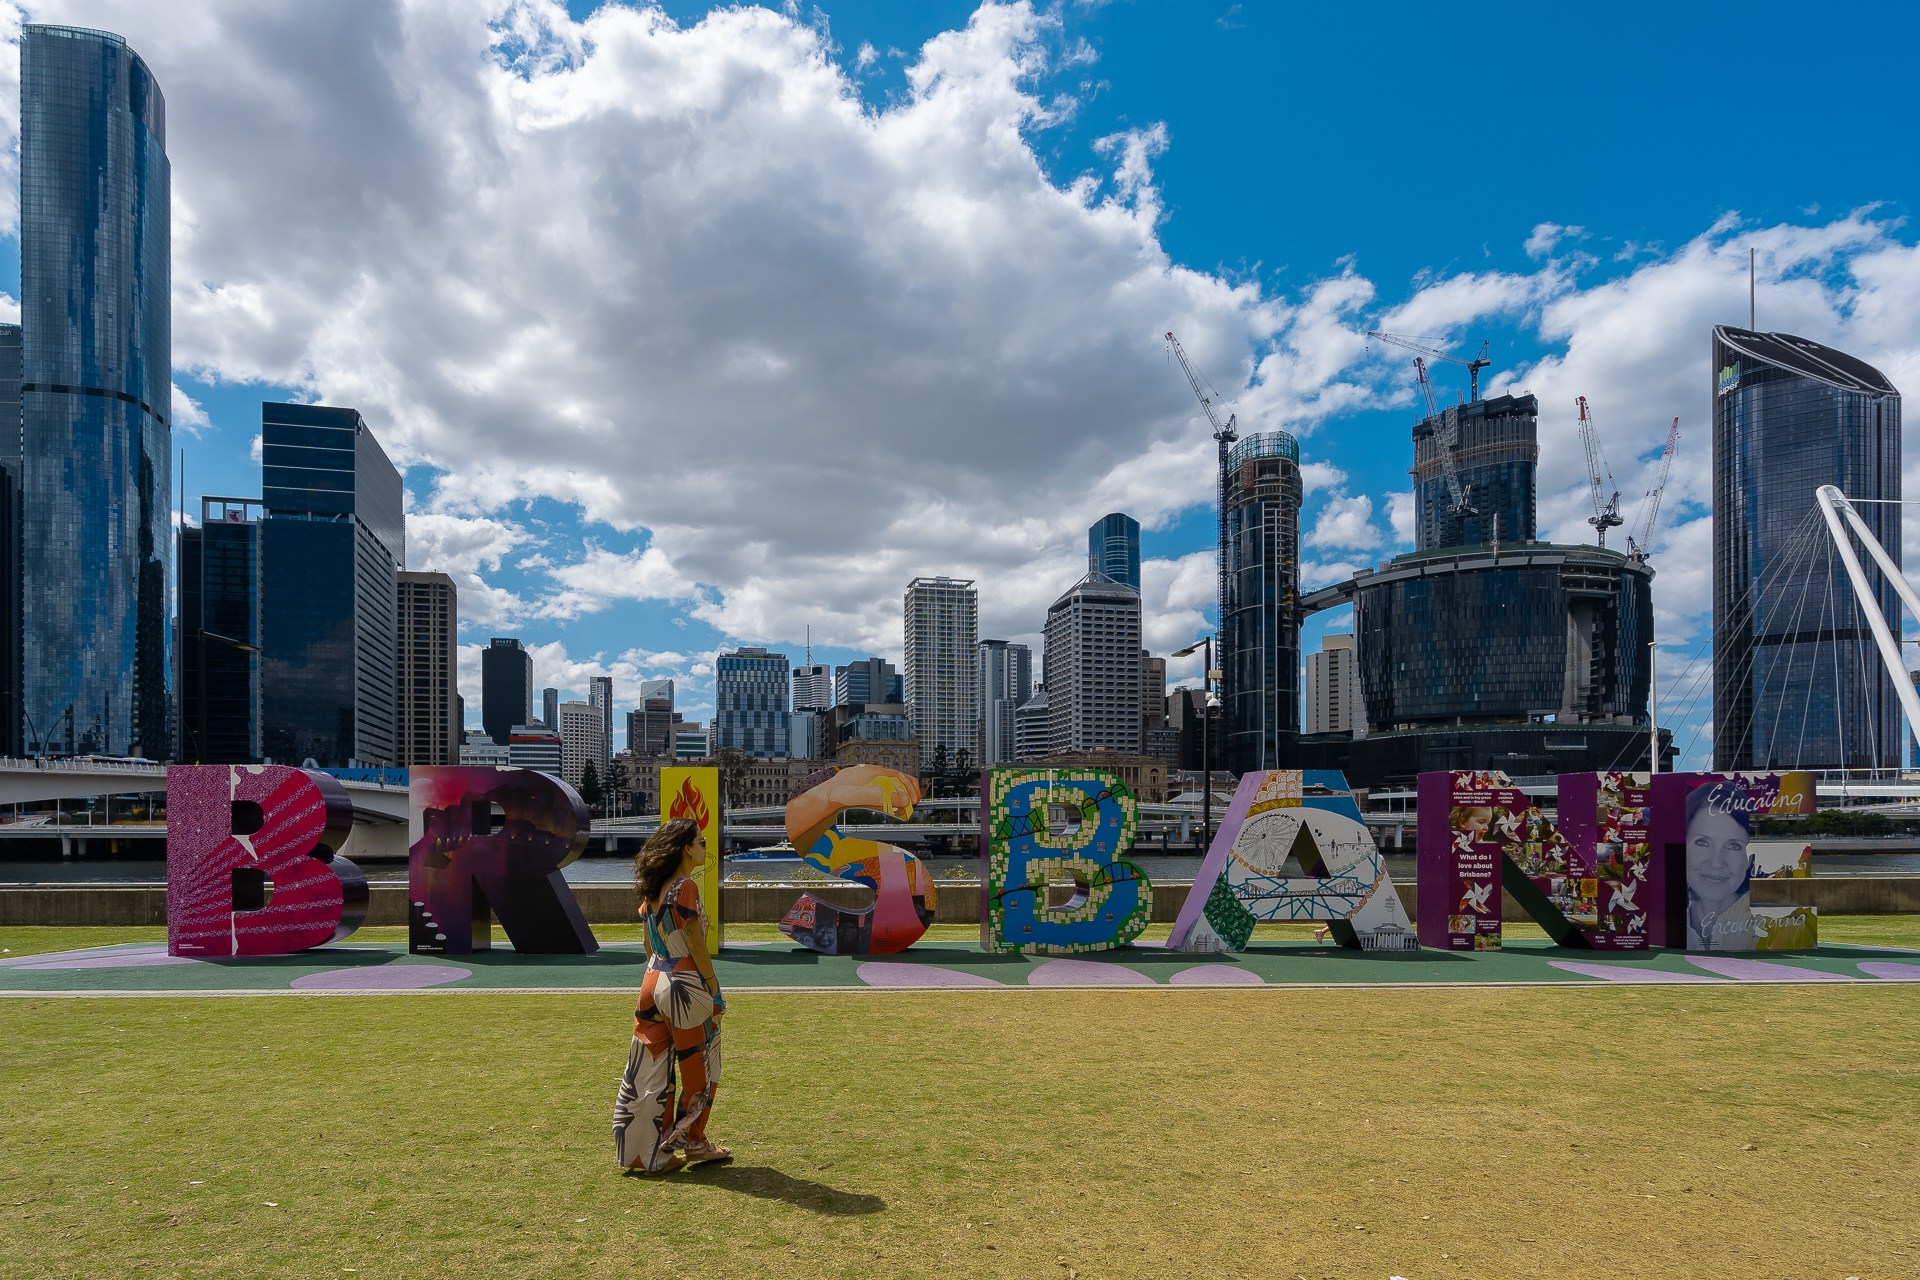 Fernanda in front of a sign saying Brisbane during our road trip in Australia with buildings in the background